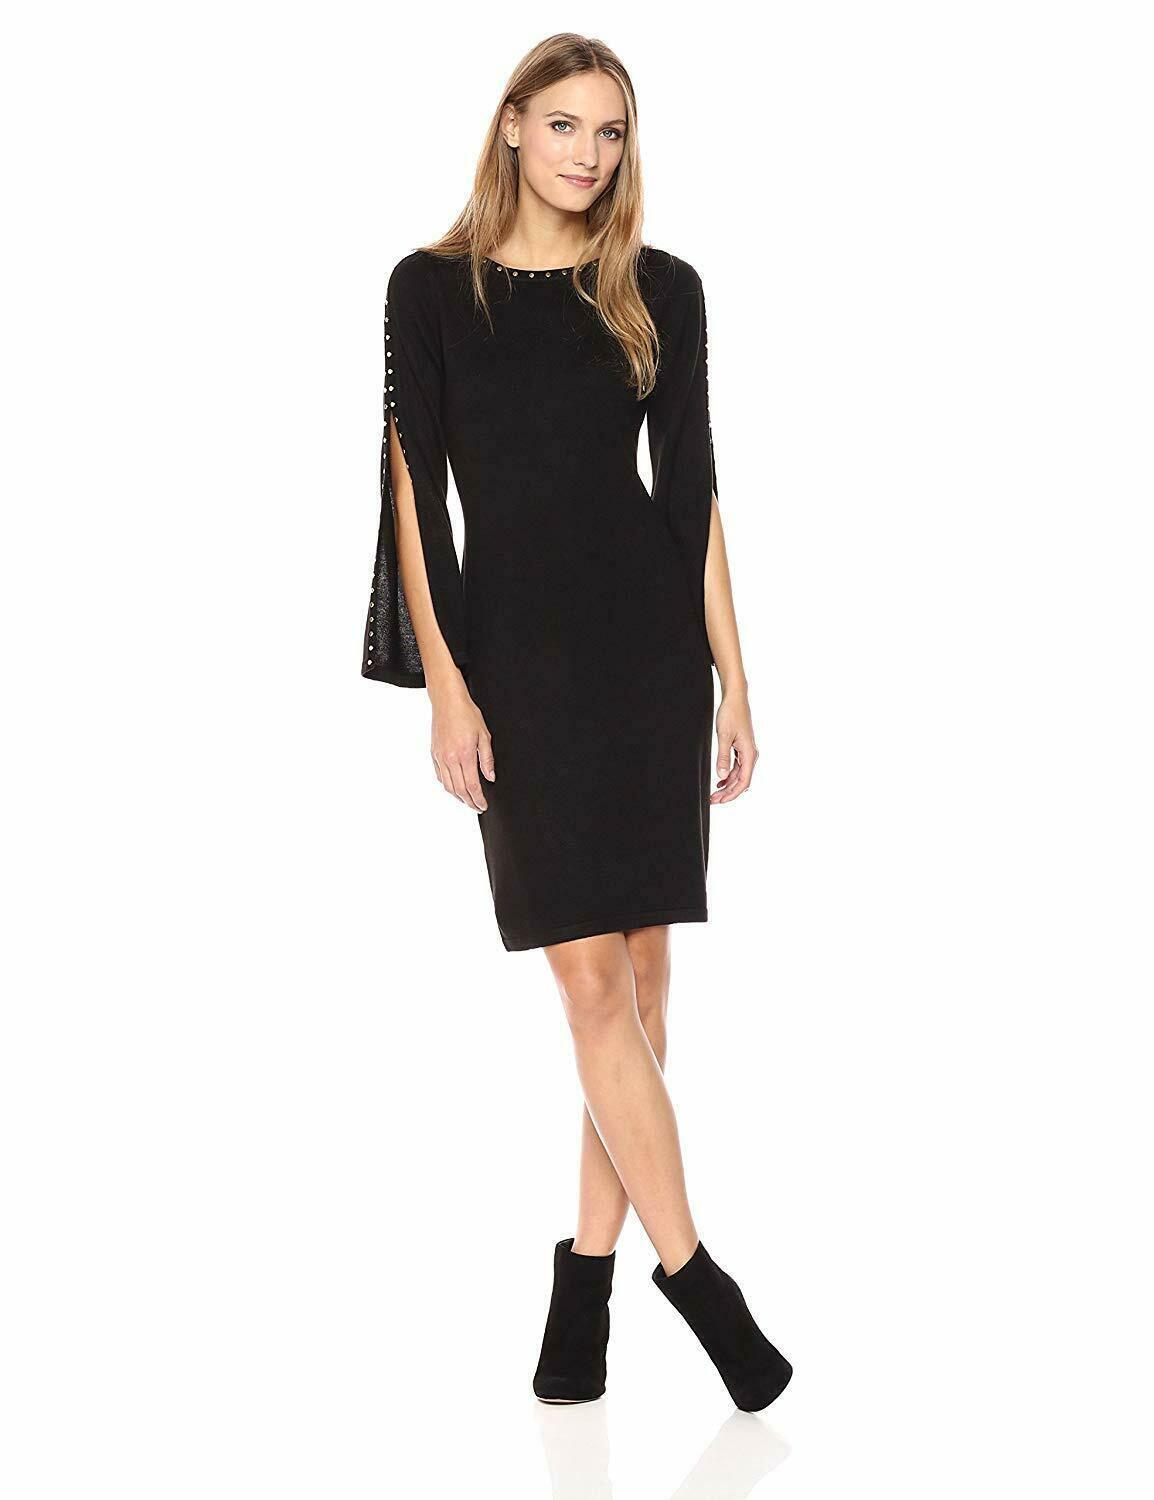 Calvin Klein Women's Sweater Dress with Gold Embellishment Size M - SVNYFancy